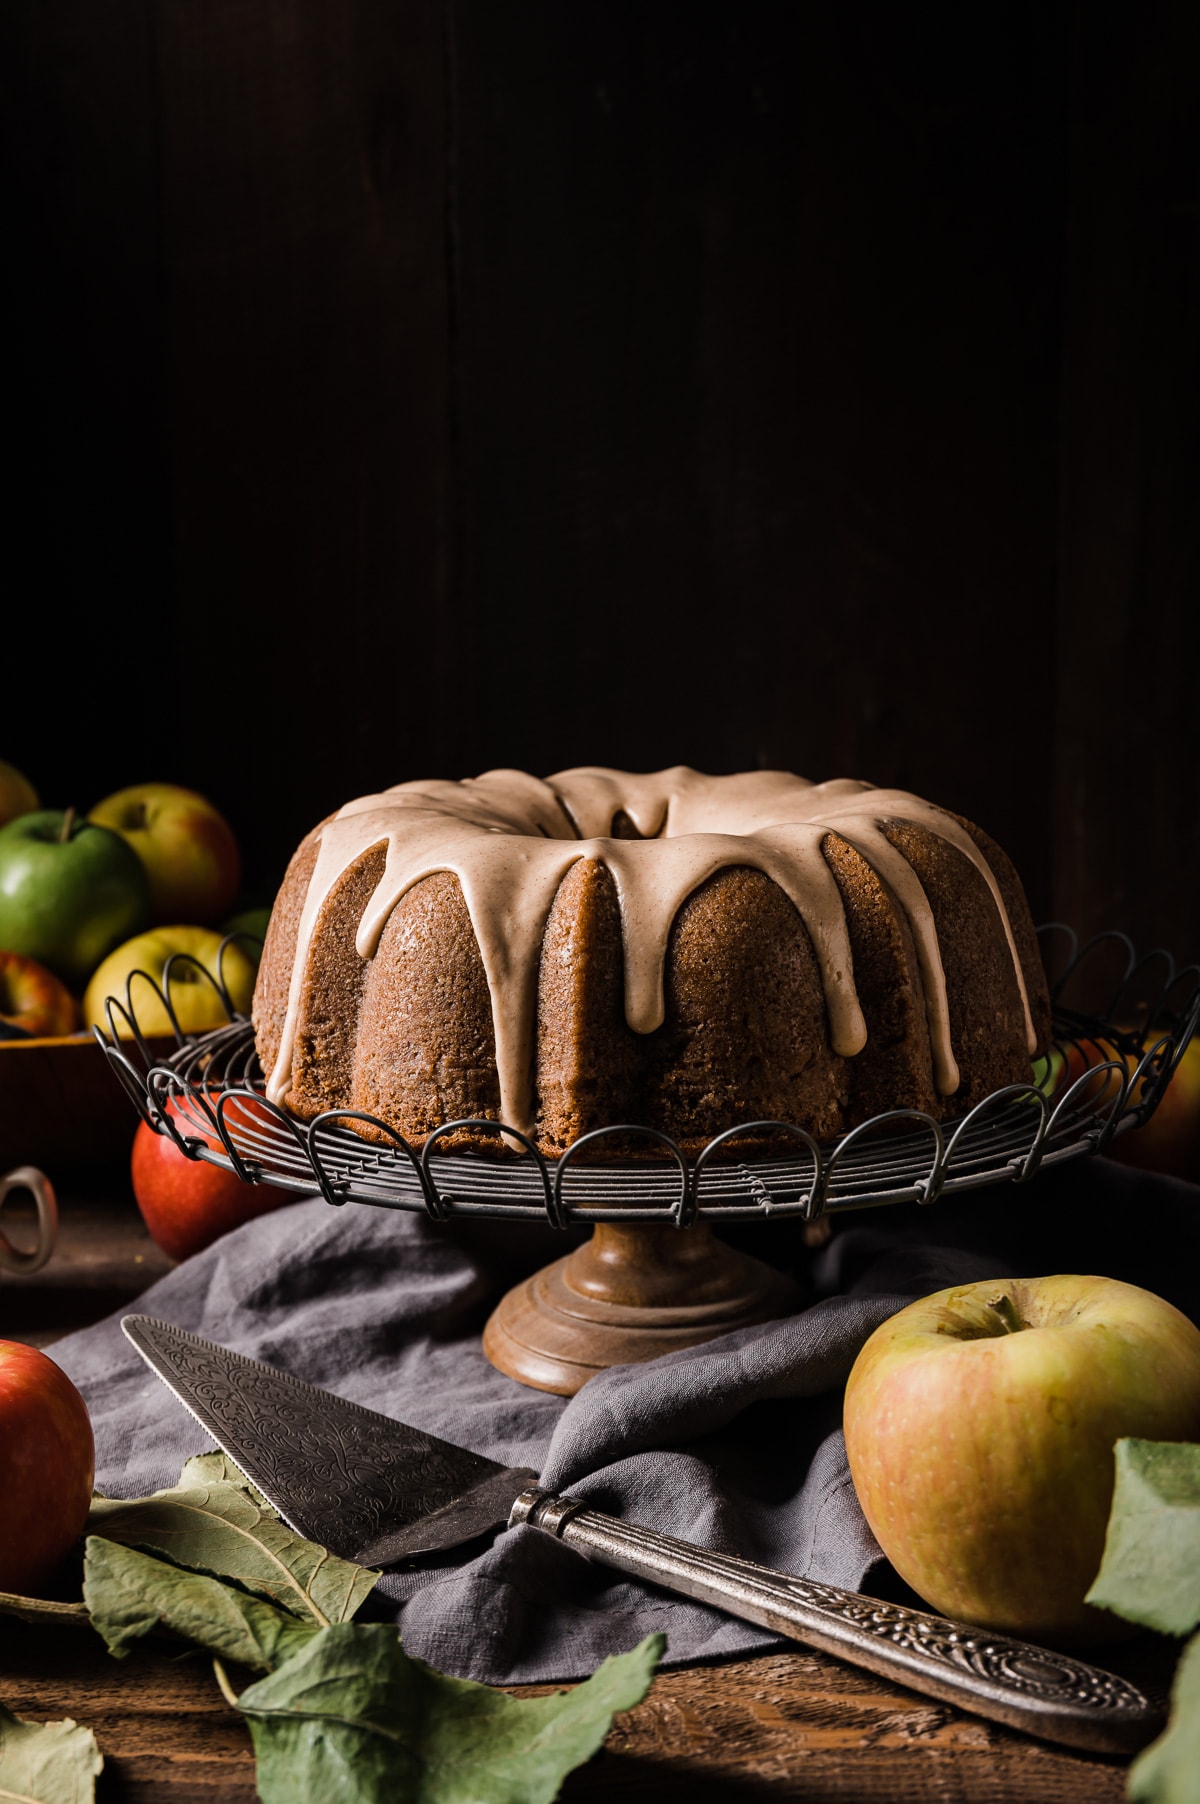 brown bundt cake with light brown icing on a wire cake stand with cake serving tool and whole yellow red and green apples